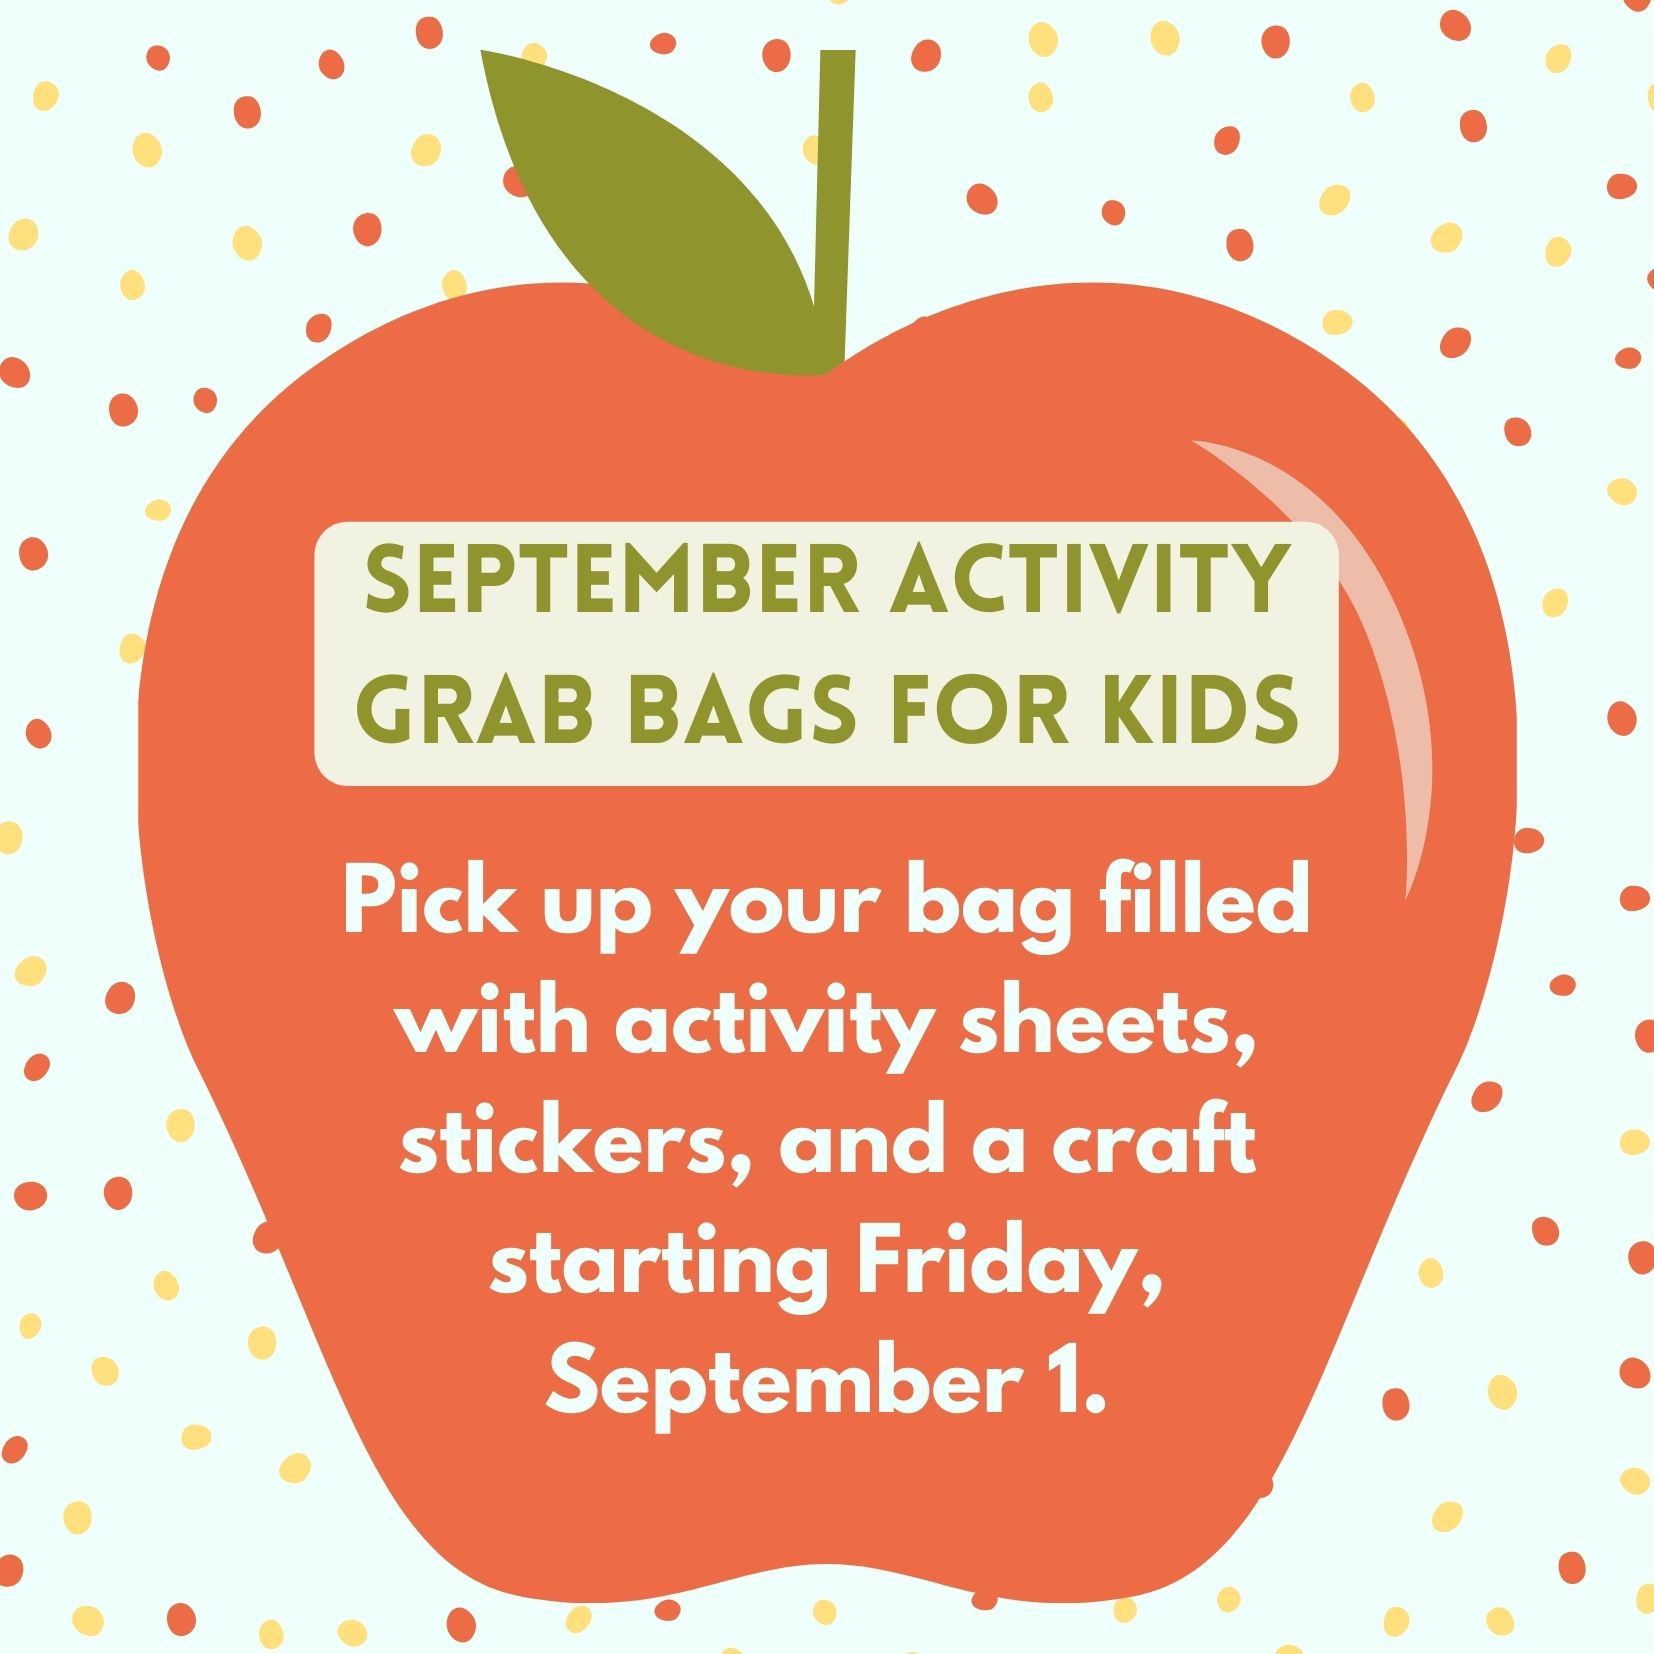 Activity Grab Bags for Kids available starting September 1.